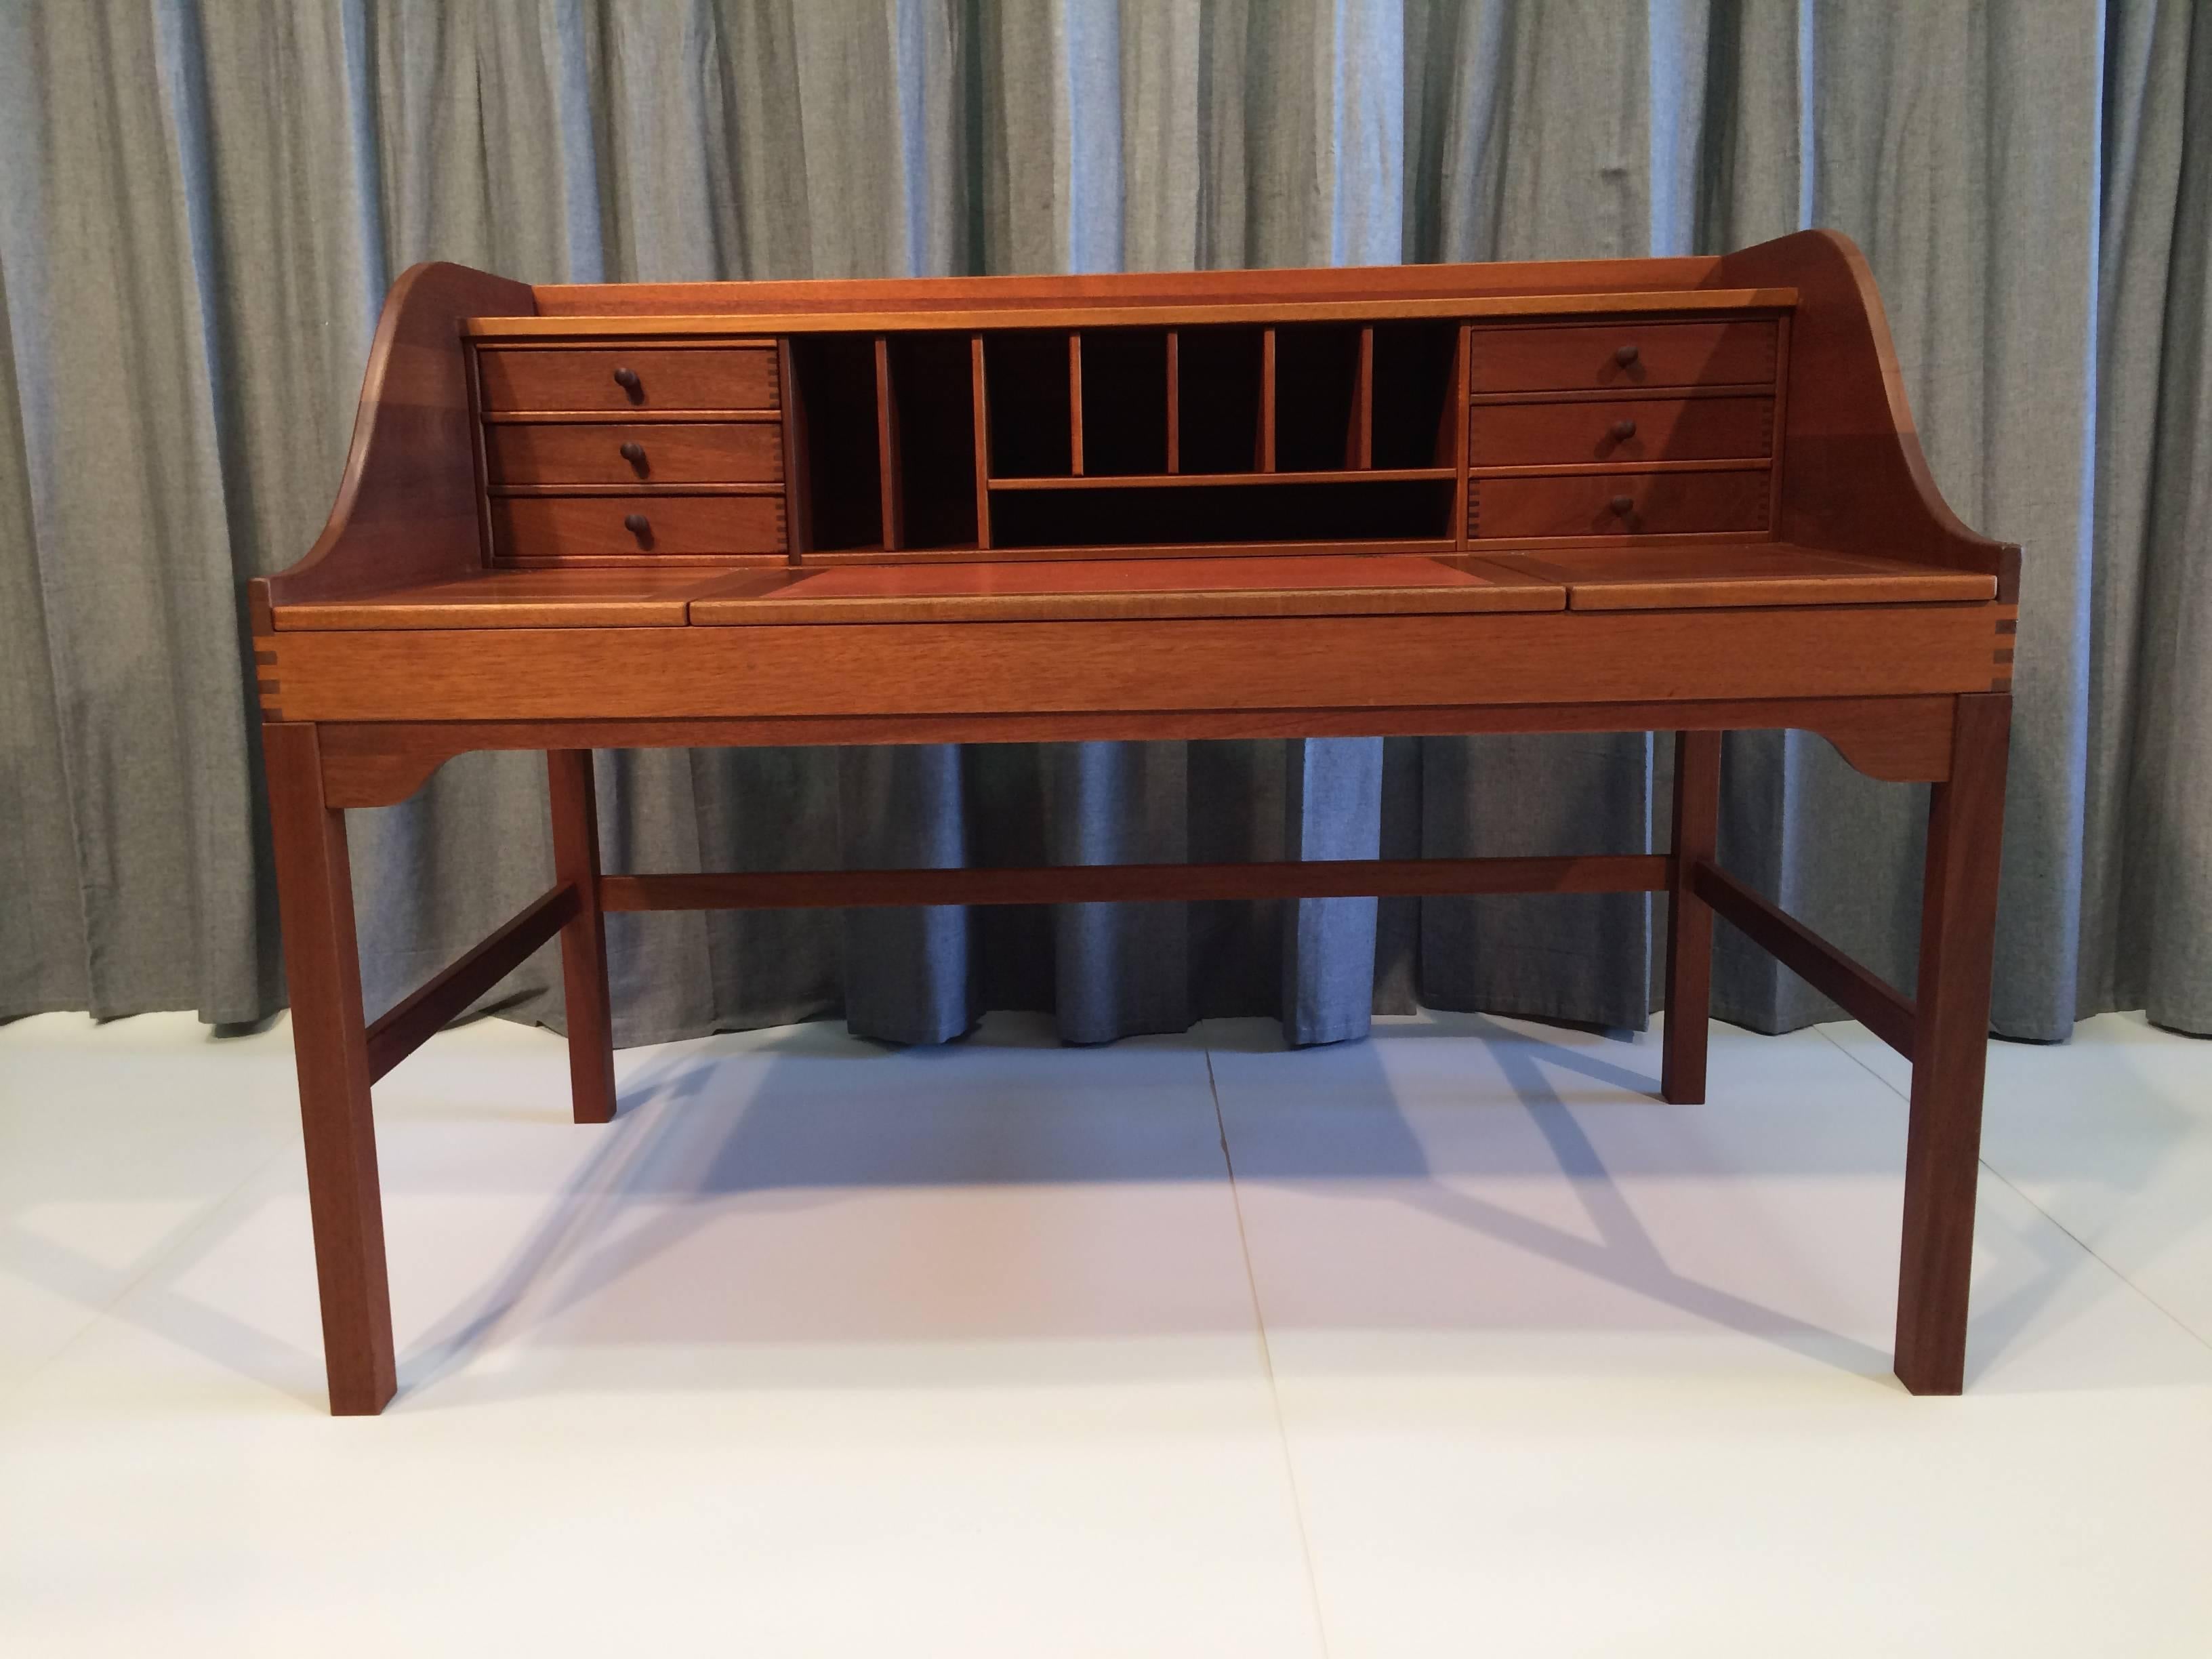 Beautiful desk made of solid mahogany, leather and brass hardware. the craftsmanship is stunning. the desk has plenty of storage under writing surface and has six drawers. Made in Denmark.